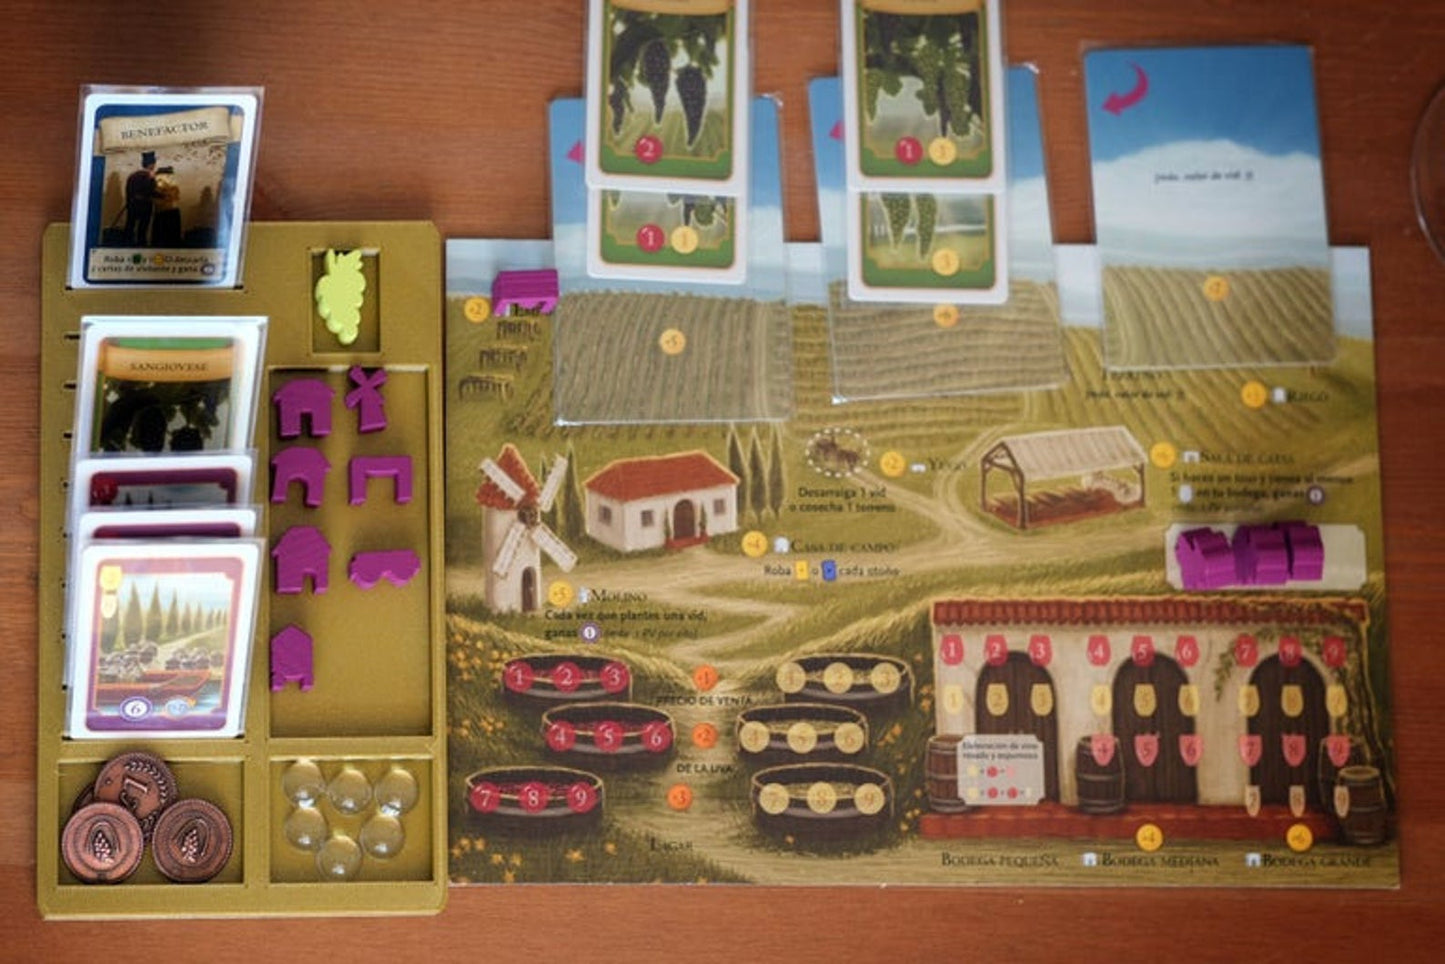 2 Viticulture dashboard game panel.